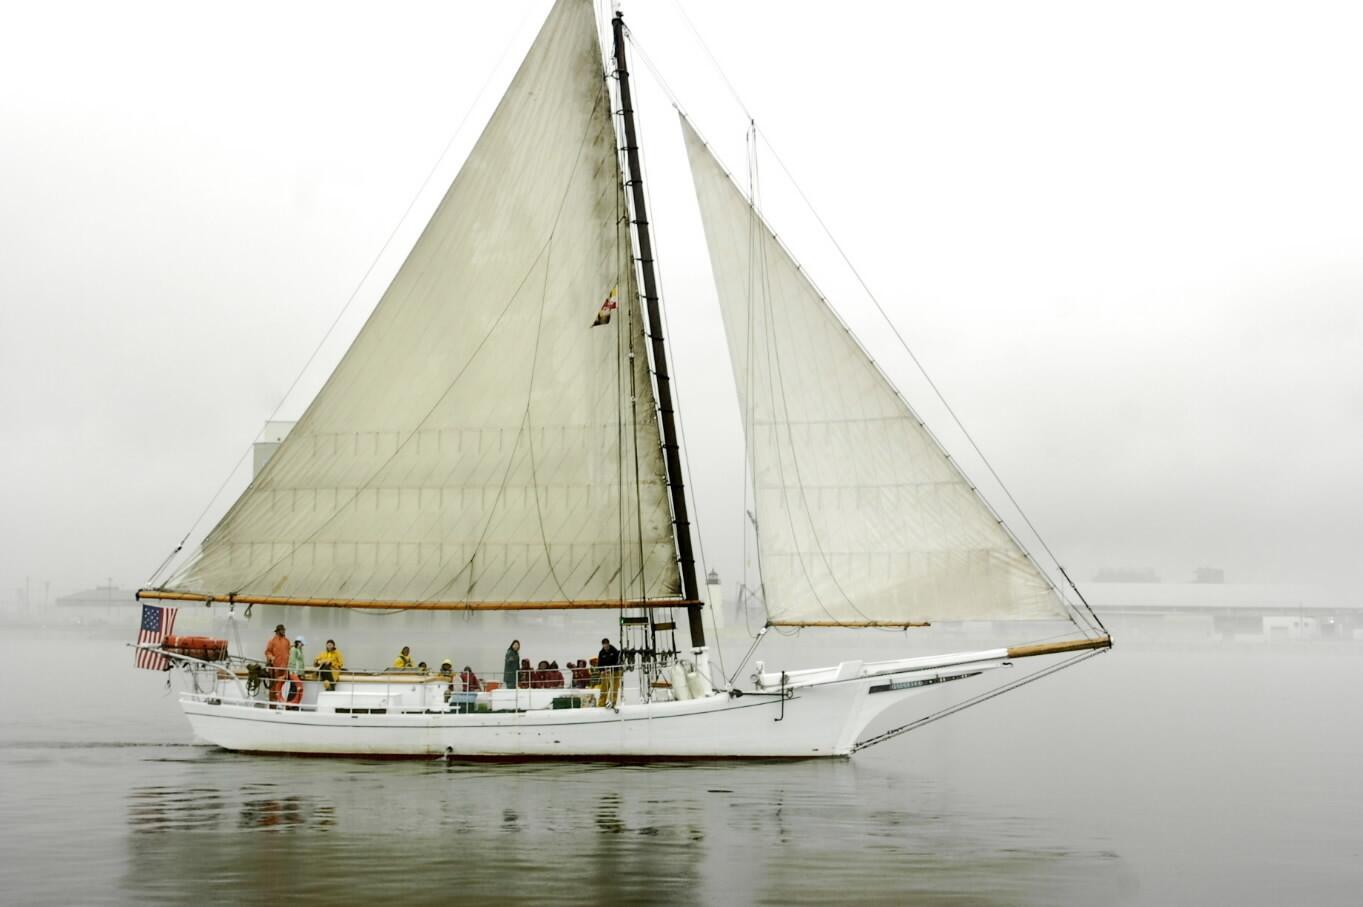 Ryleigh's Oyster is hosting a second season of oyster voyages on the Skipjack Sigsbee. This year's schedule of two-hour harbor tours starts with an evening outing on June 4 and an afternoon excursion on June 7. Each oyster voyage ticket includes unlimited refreshments, including oysters, Ryleigh's signature fruit crushes, beer, wine and appetizers. The voyages depart from The Living Classrooms pier at Frederick Douglass-Isaac Myers Maritime Park. Tickets for Ryleigh's oyster voyages are $65 ($40 for ages 21 and under) for the June 4, June 7 and Aug. 14 voyages. Tickets are $80 for the Sept. 9 and Sept 16 voyages, which coincide with Baltimore's Star-Spangled Spectacular event. For more information go to ryleighs.com.